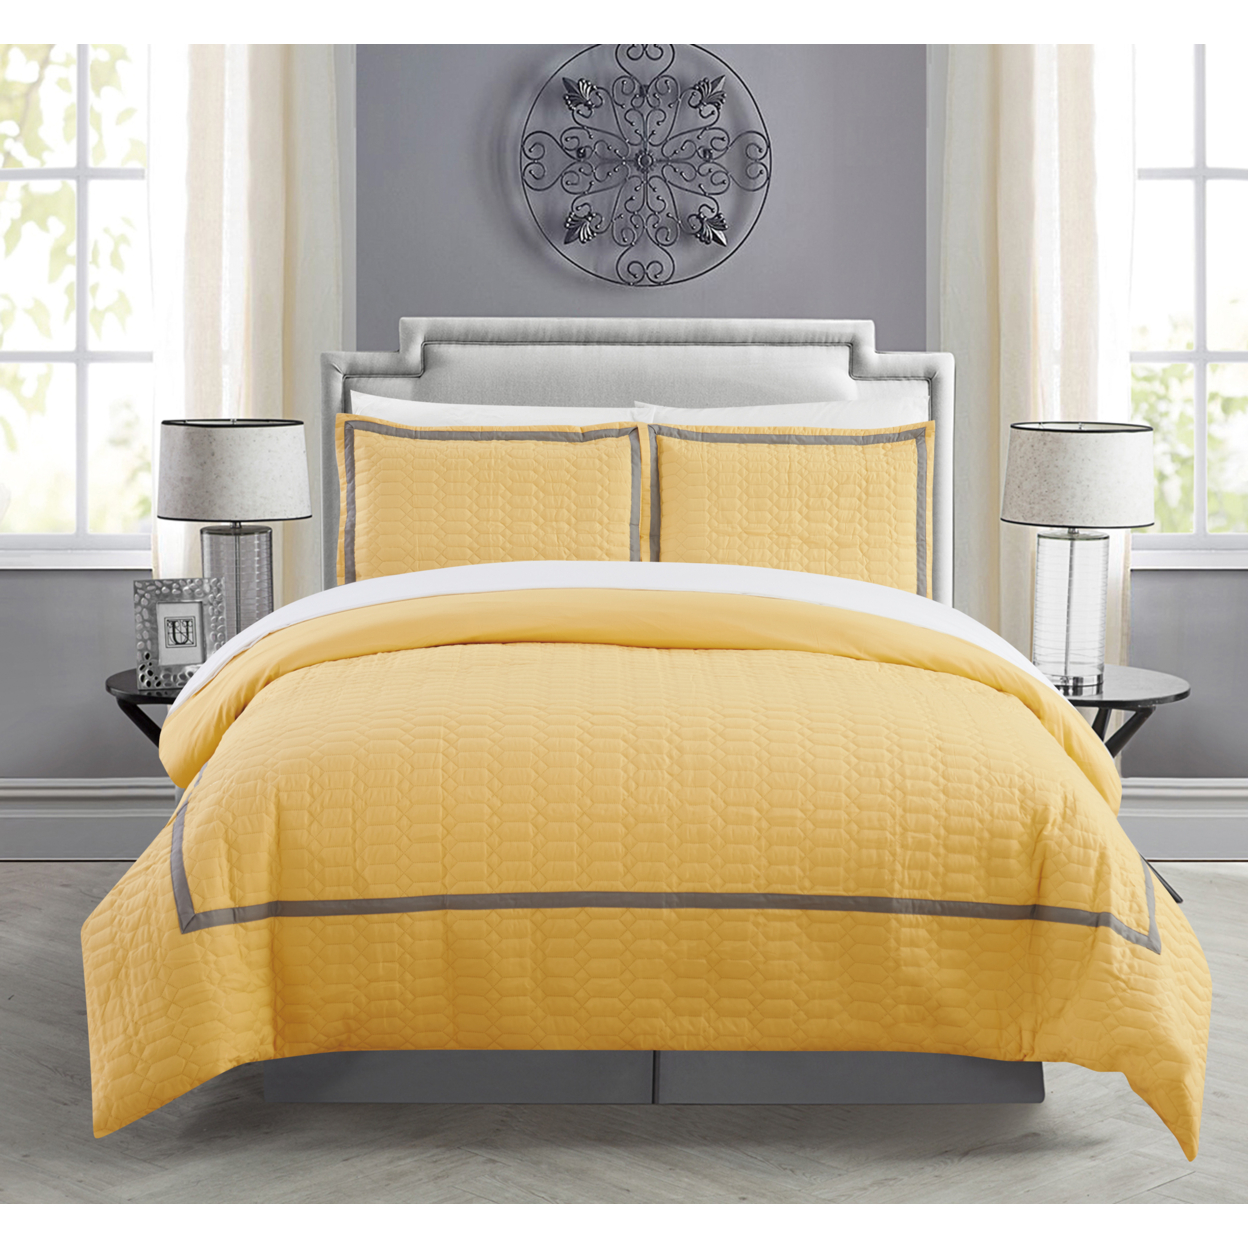 Dawn 2 Piece Duvet Cover Set Hotel Collection Two Tone Banded Print Zipper Closure - Yellow, Queen